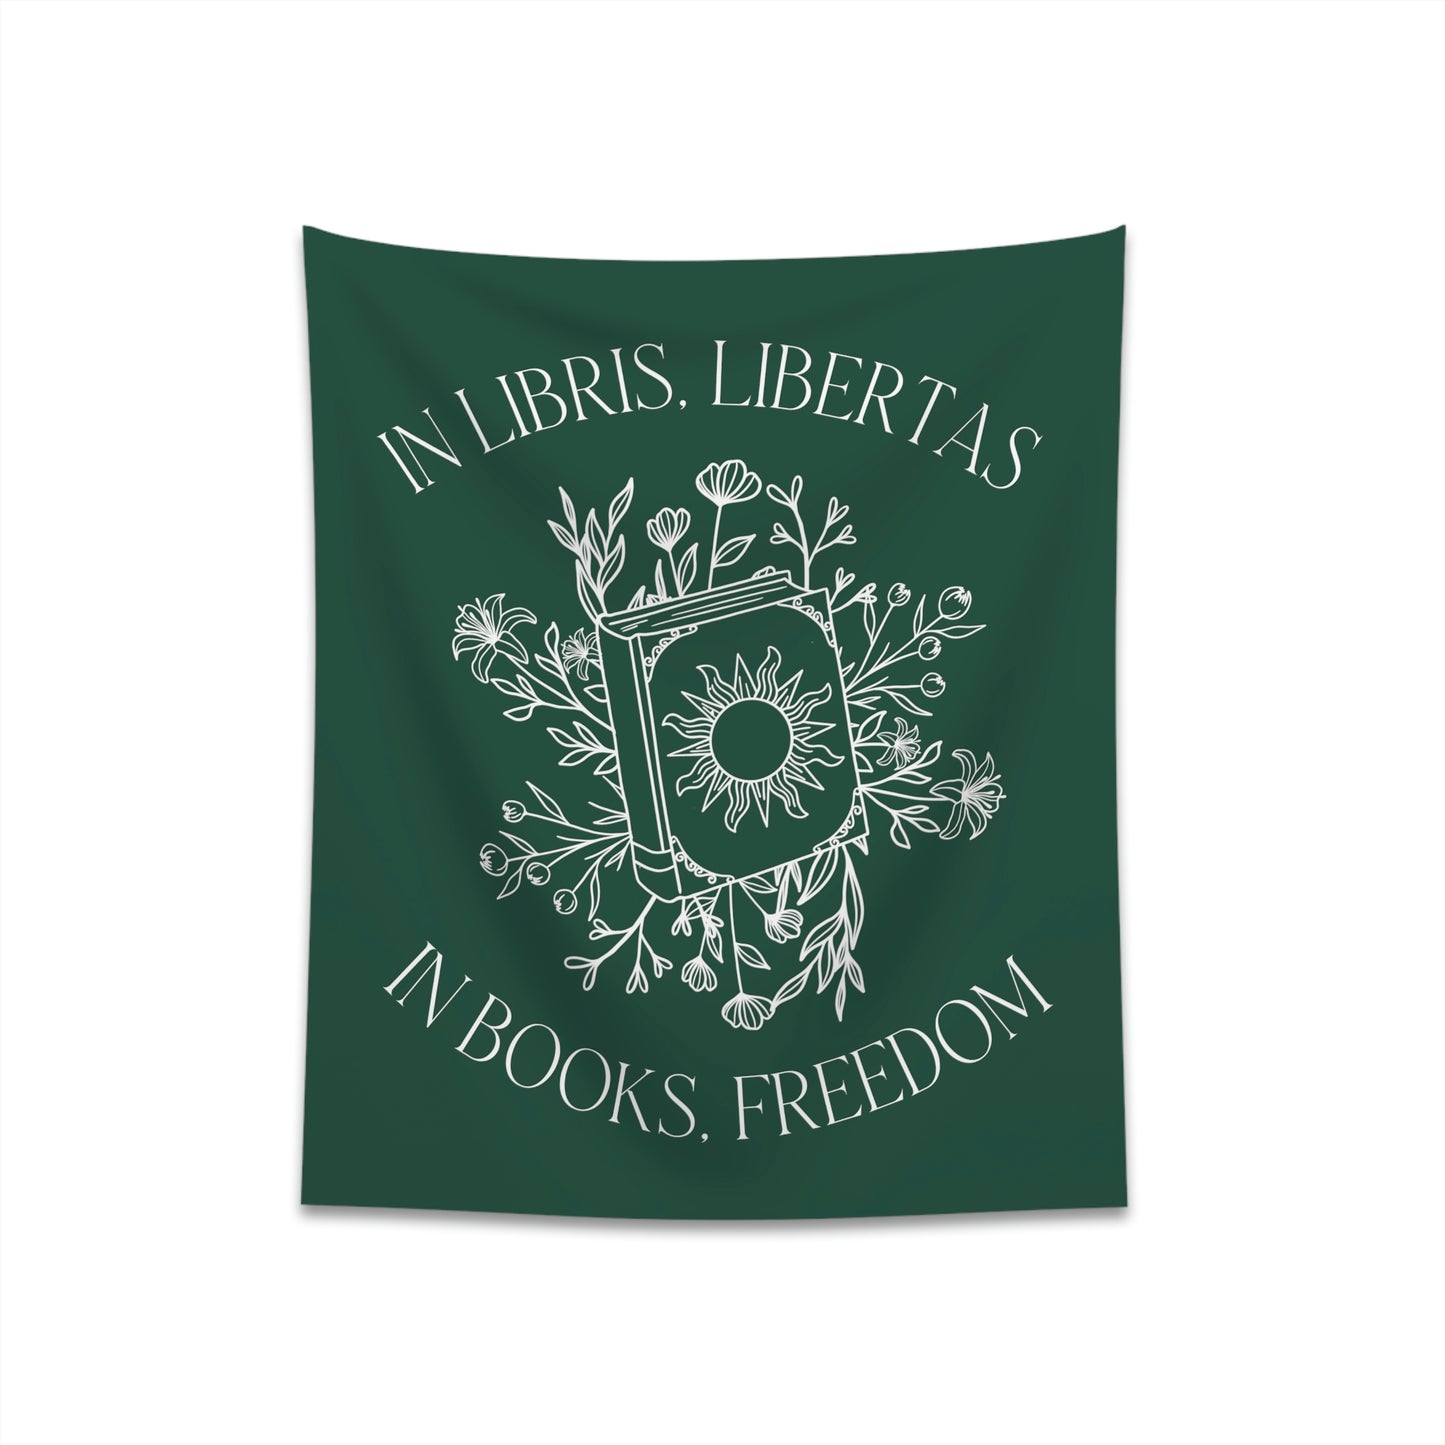 In Books, Freedom Wall Tapestry